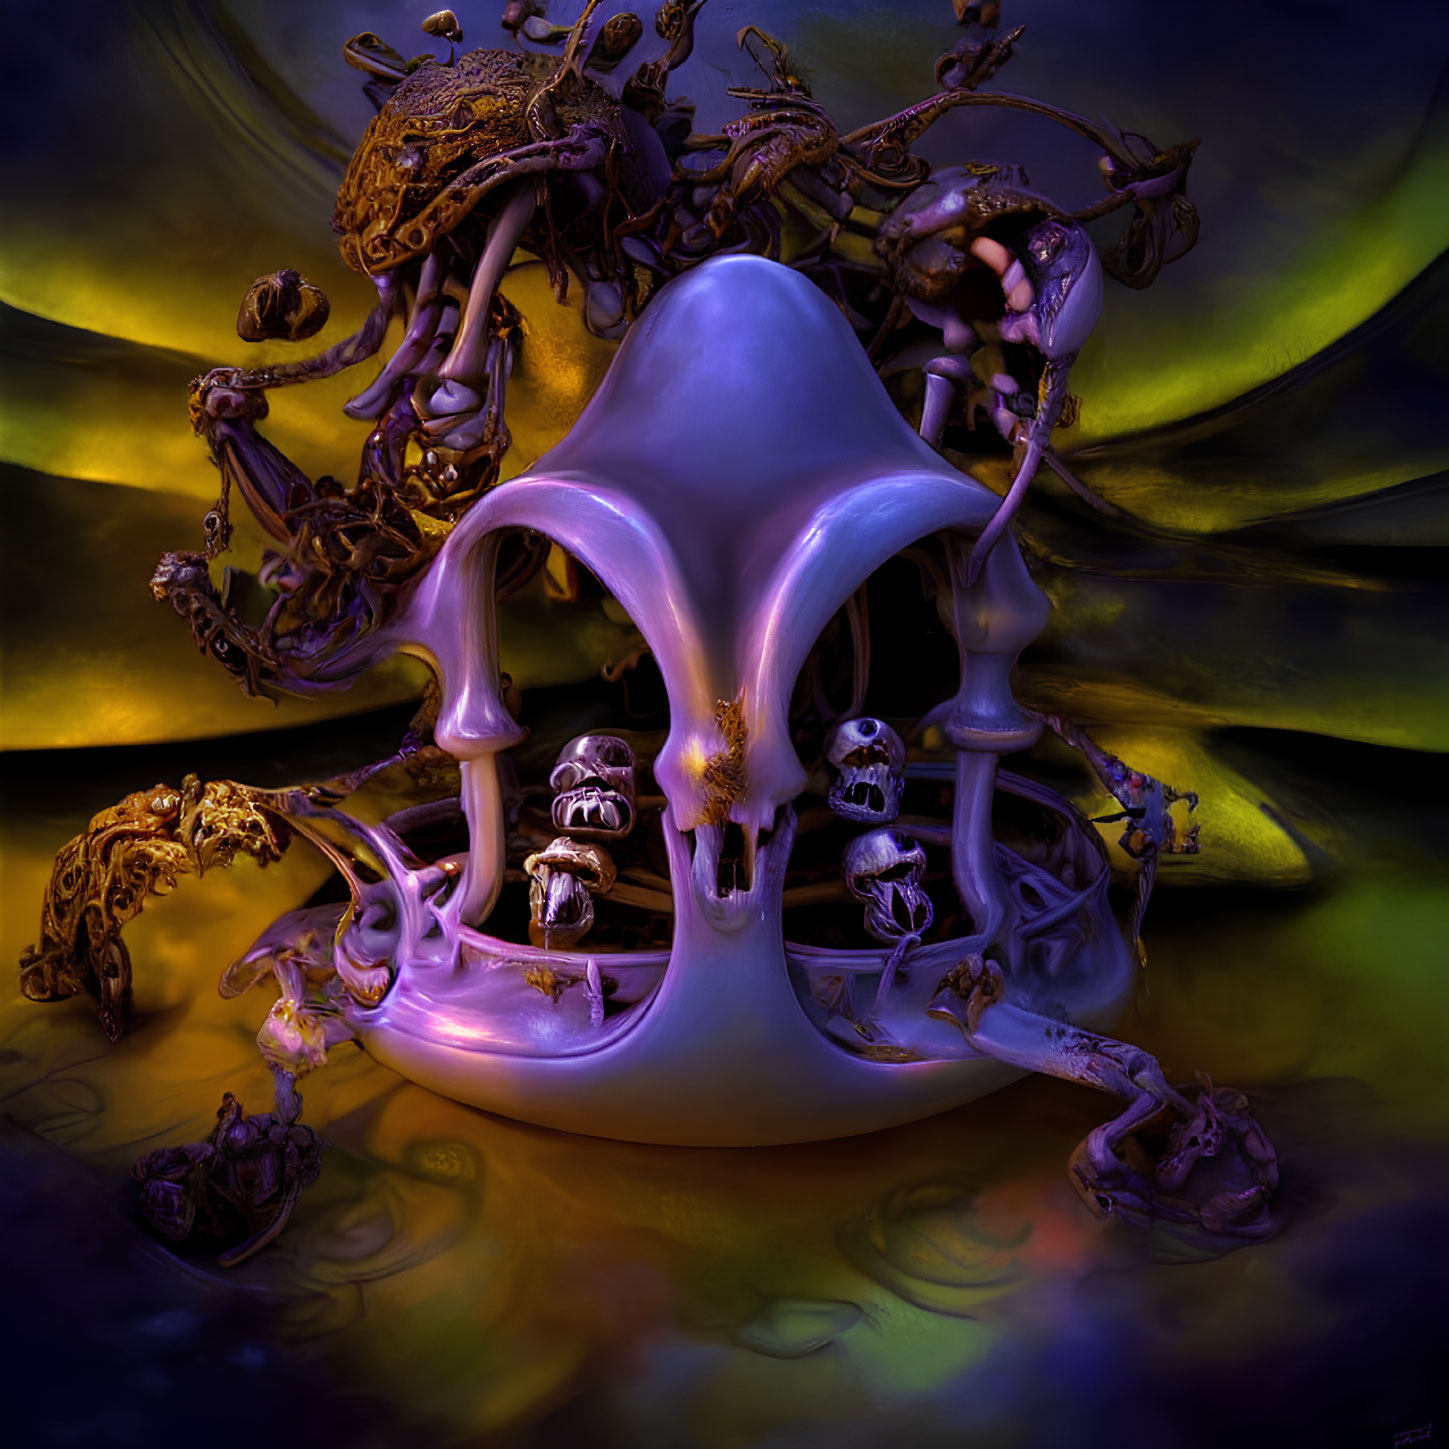 Surreal artwork with skull-like form, violet glow, abstract swirls, and metallic structures